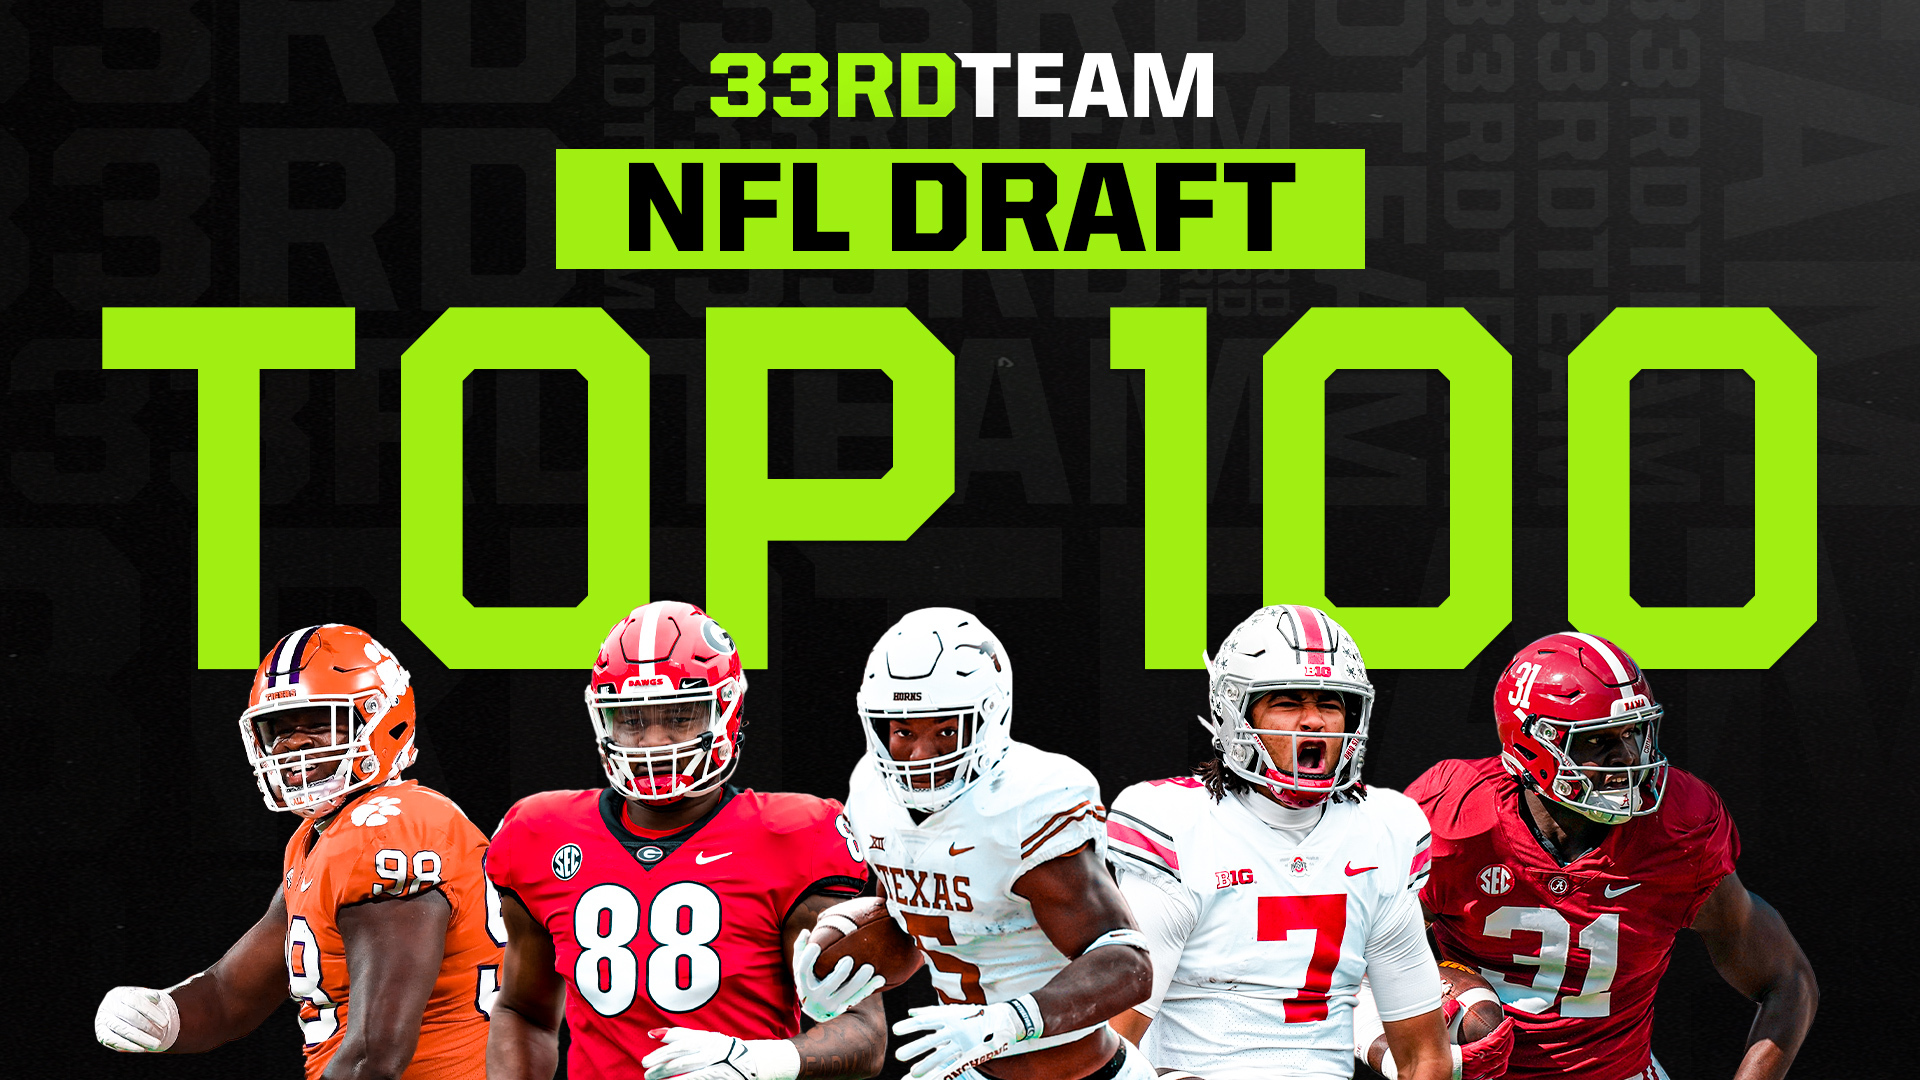 top 100 draft prospects